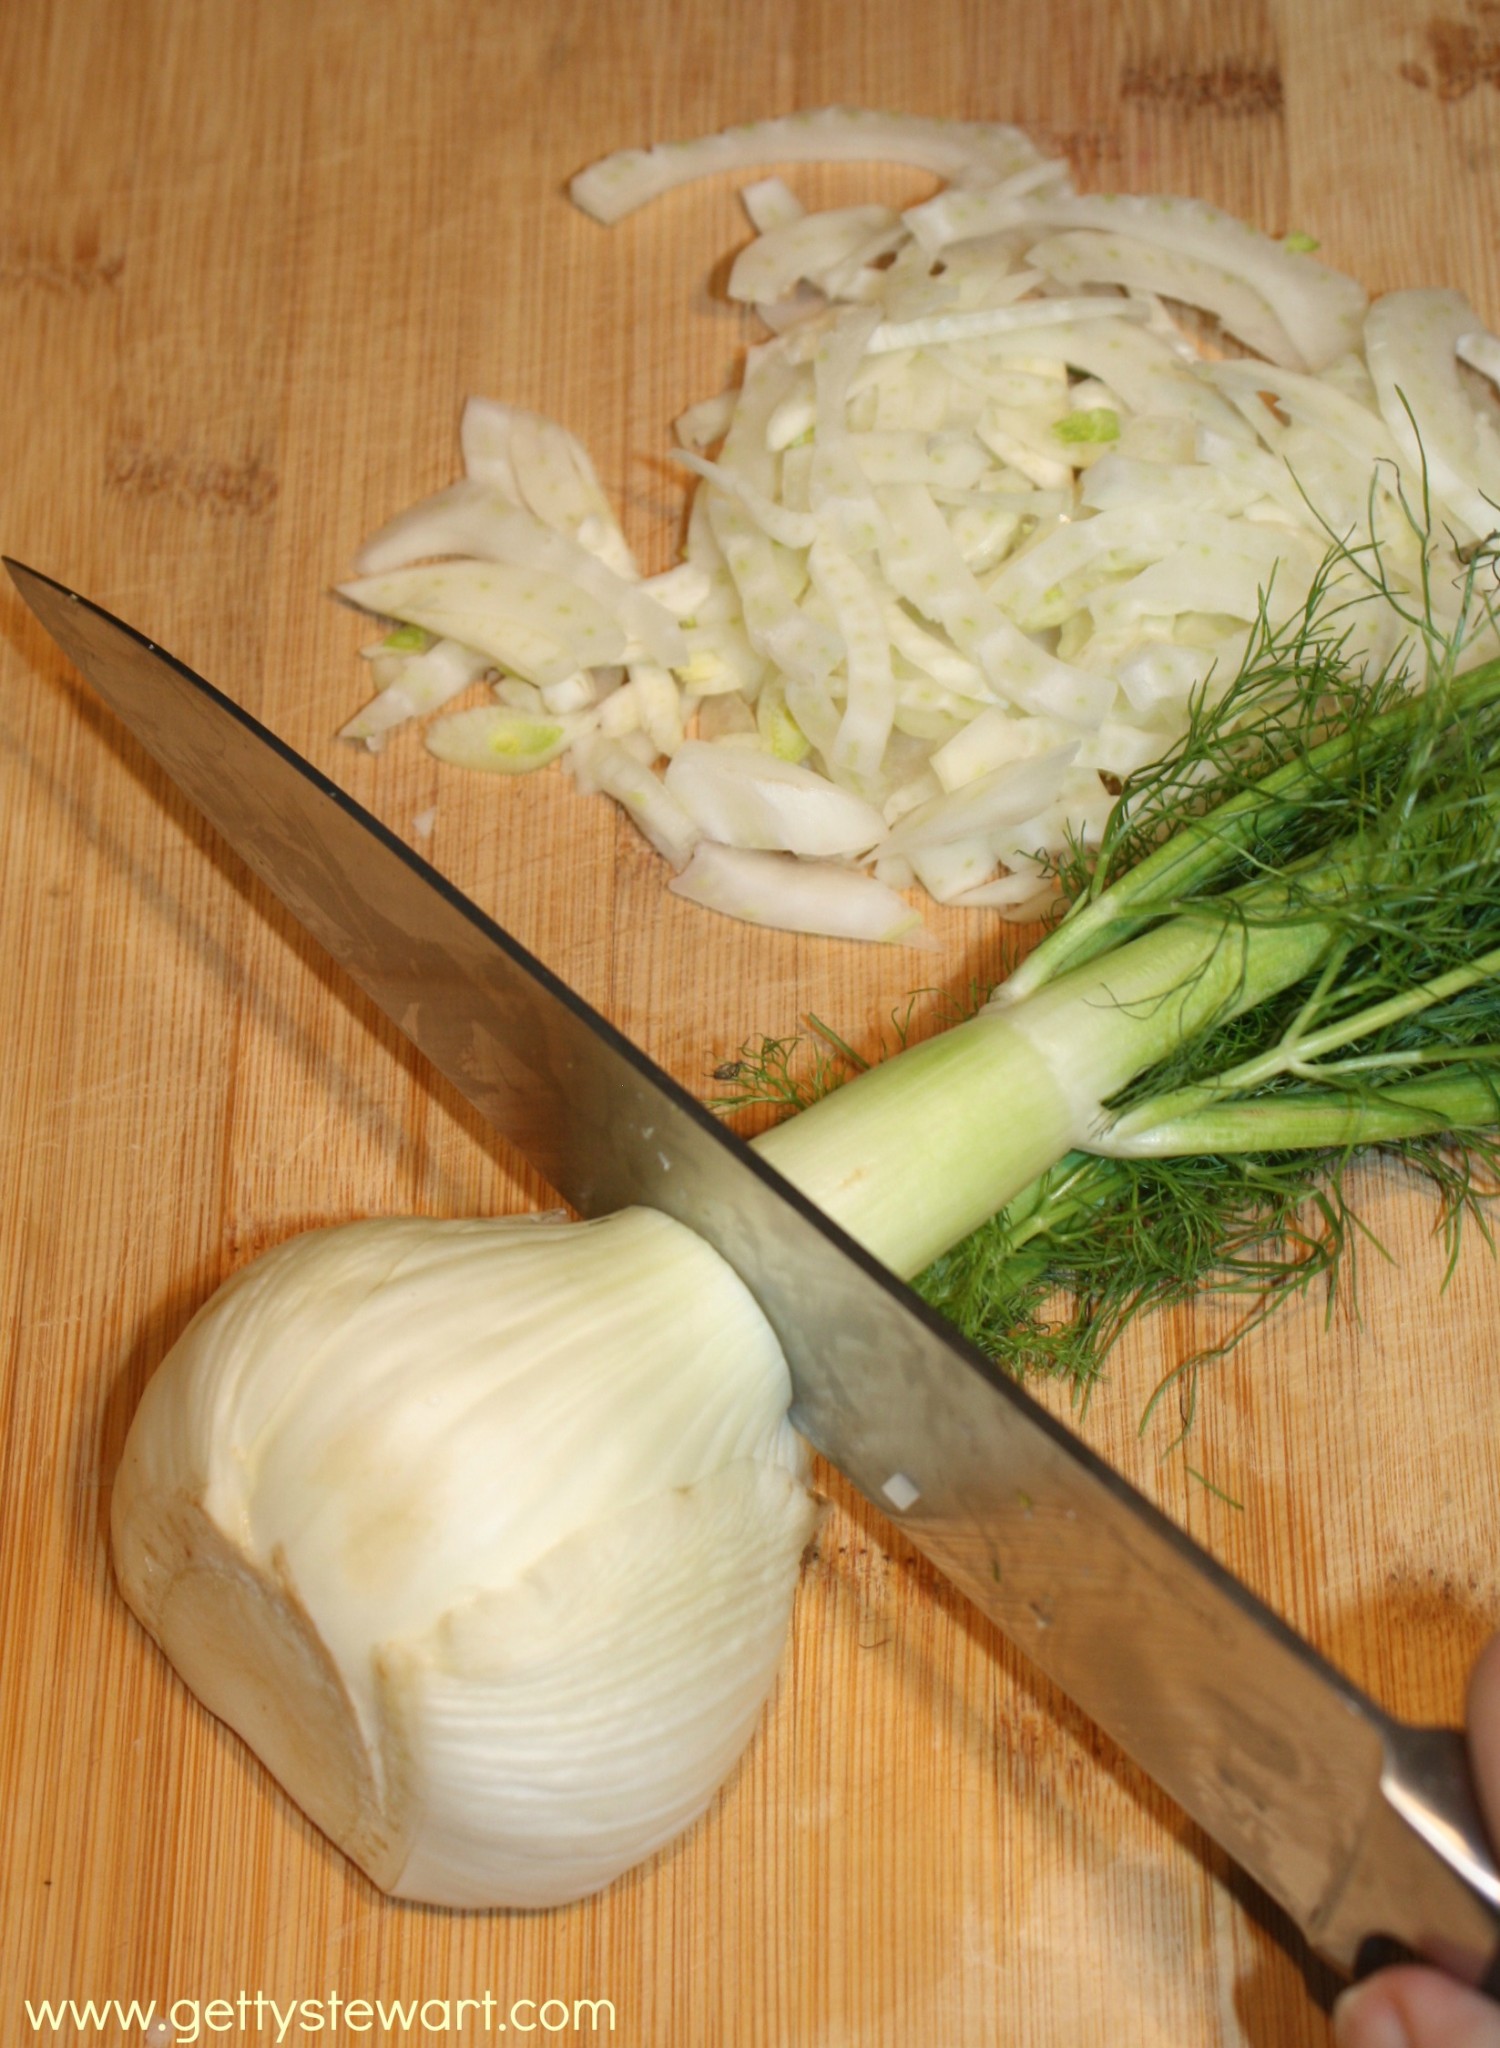 Fennel - What is it and how do I select, store and use it